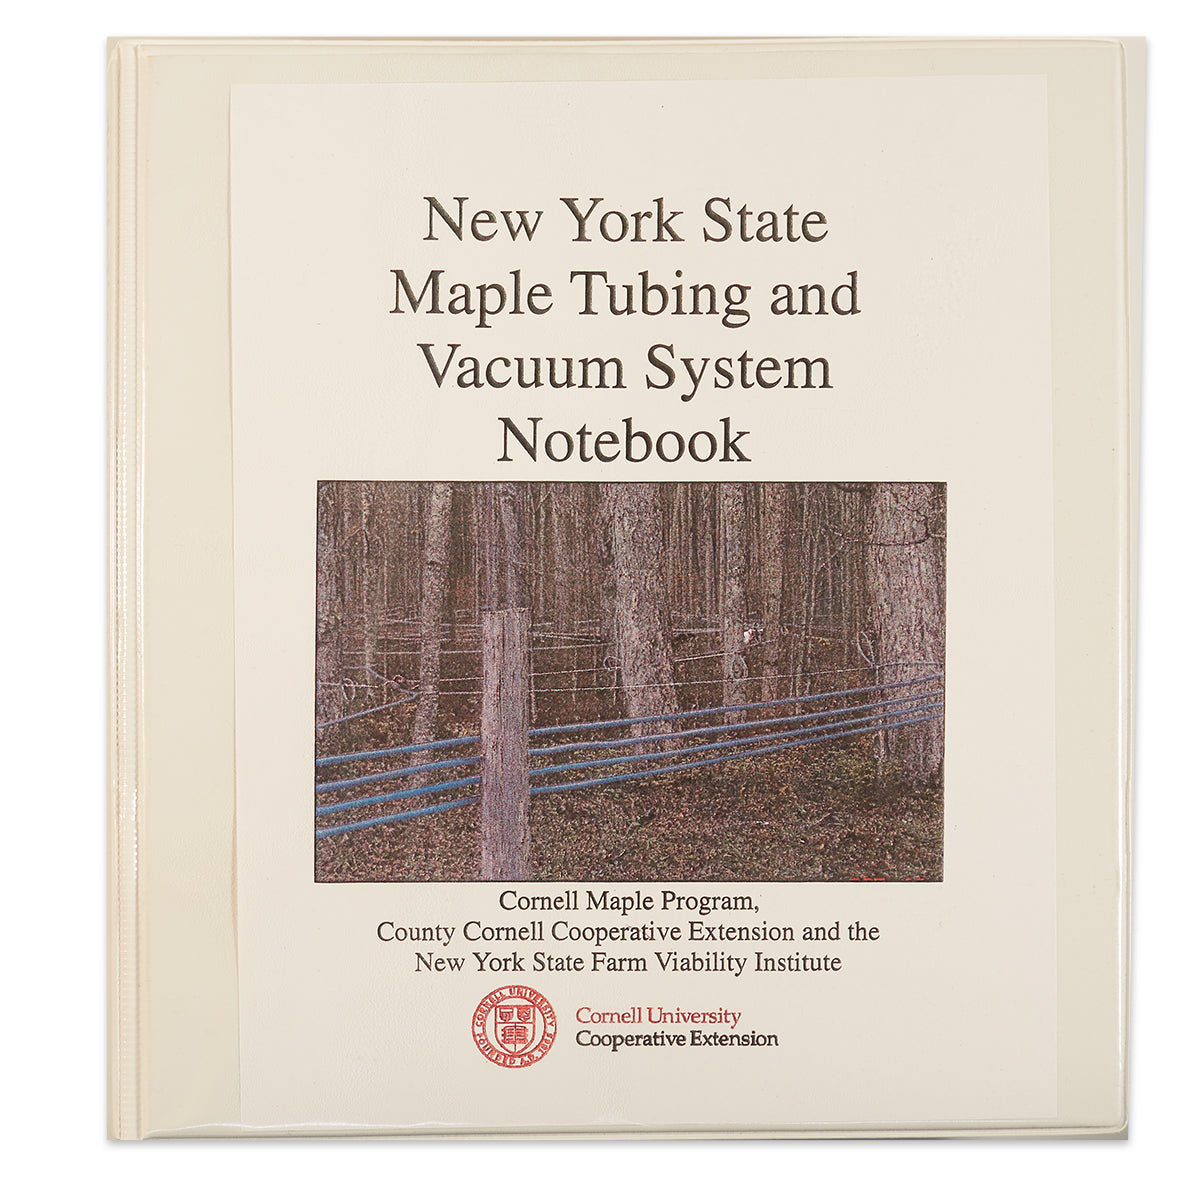 NYS Maple Tubing and Vacuum System Notebook